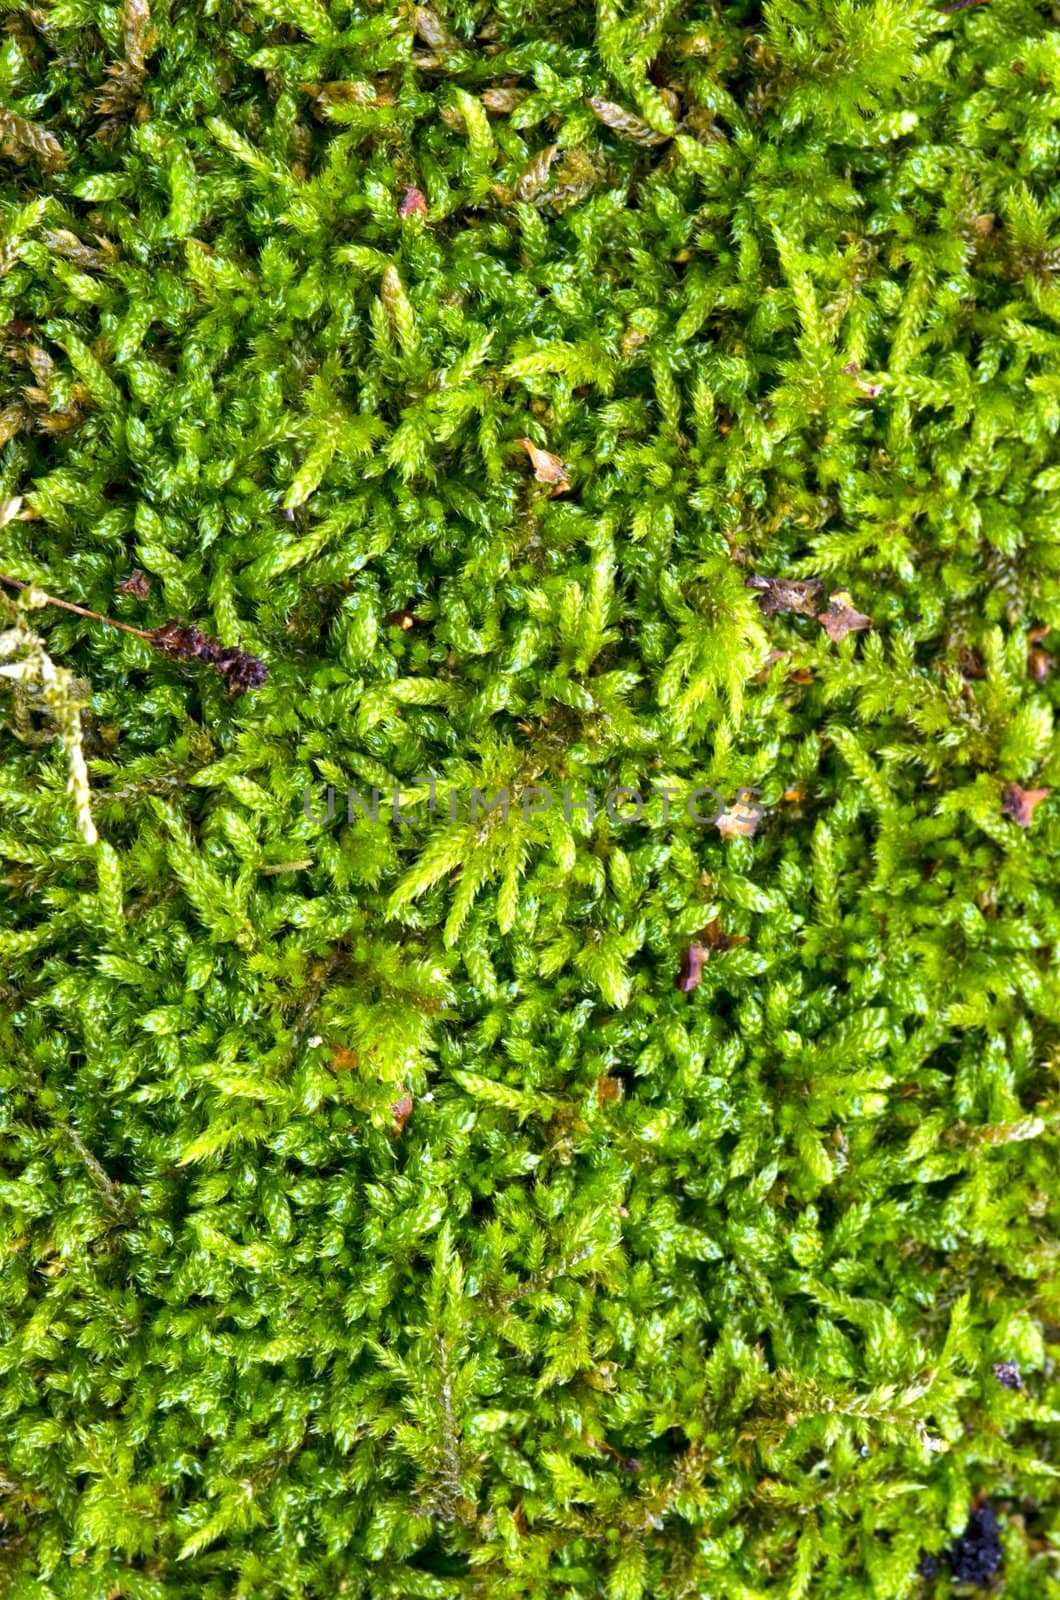 Macro detail of moss floor. Fragment of natural forest ground.